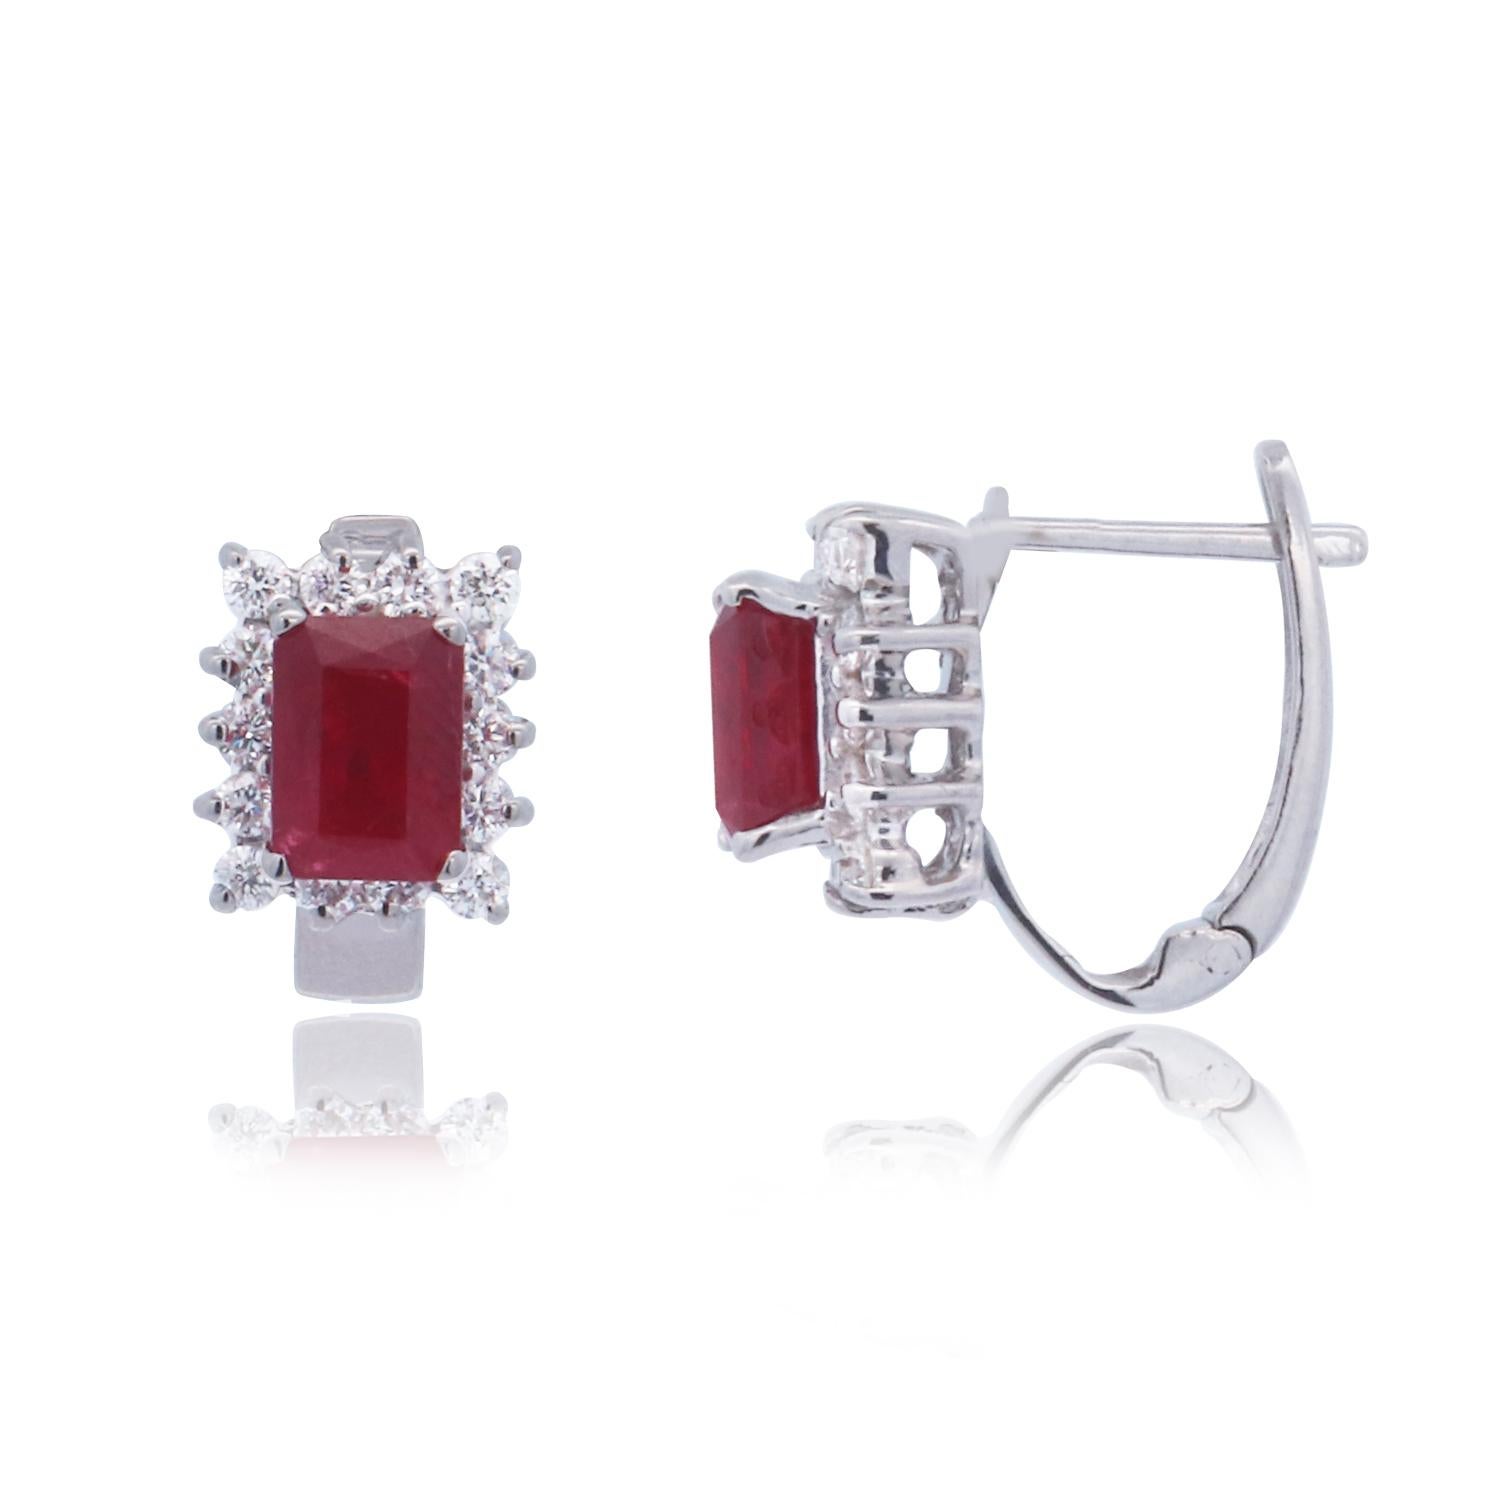 Metal: 18K White Gold
Stone: 2 Ruby Emeralds at 2.57 Carats Total Weight
Accent Stone: 28 Round Diamonds at 0.70 Carats Total Weight 
Color- SI/ Clarity: H-I

Fine one-of-a-kind craftsmanship meets incredible quality in this breathtaking piece of